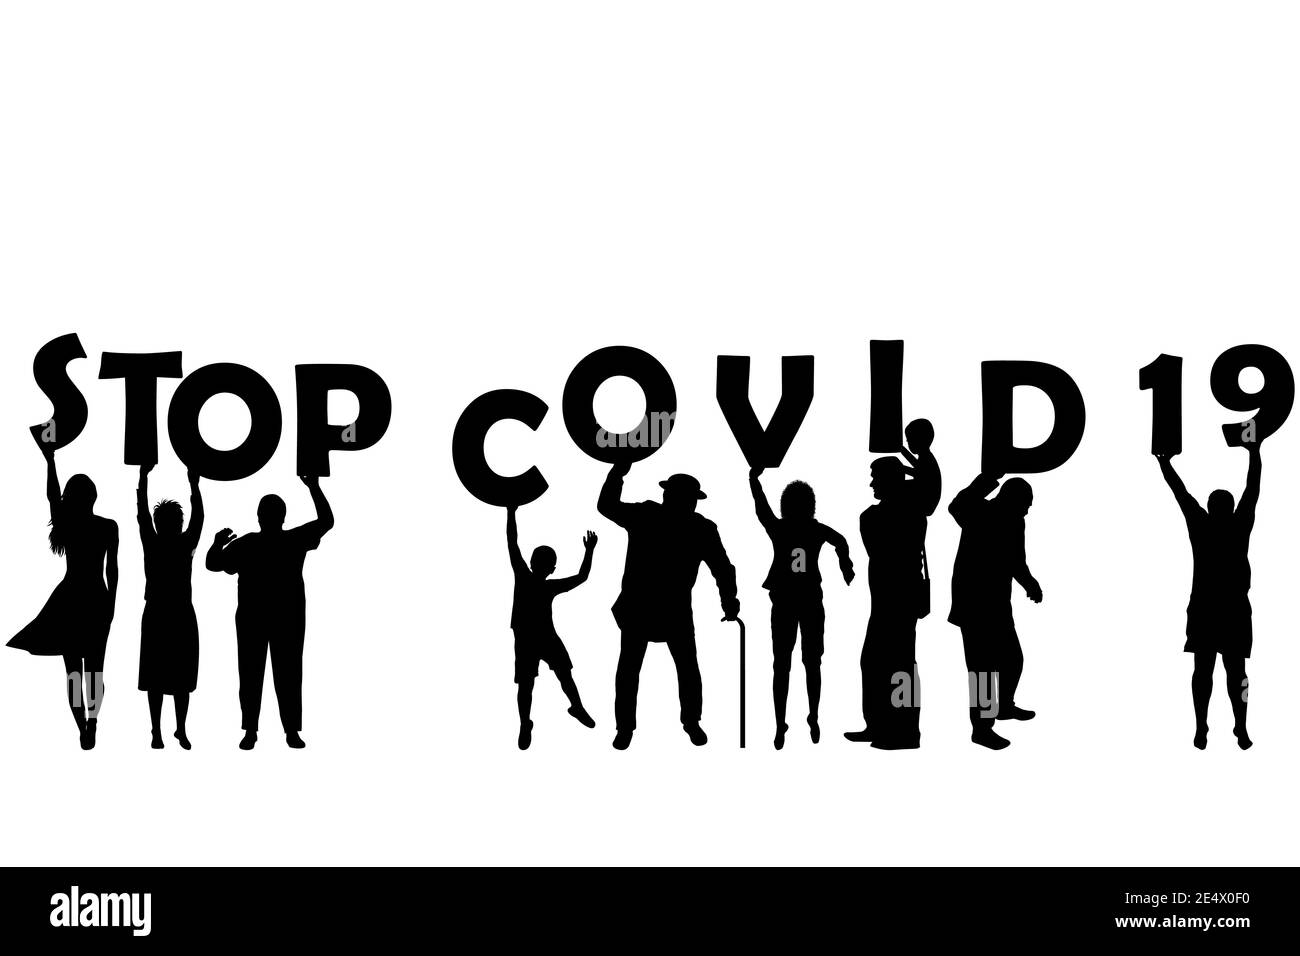 STOP COVID 19 (Coronavirus) with silhouette of women, men and children holding letters Stock Vector